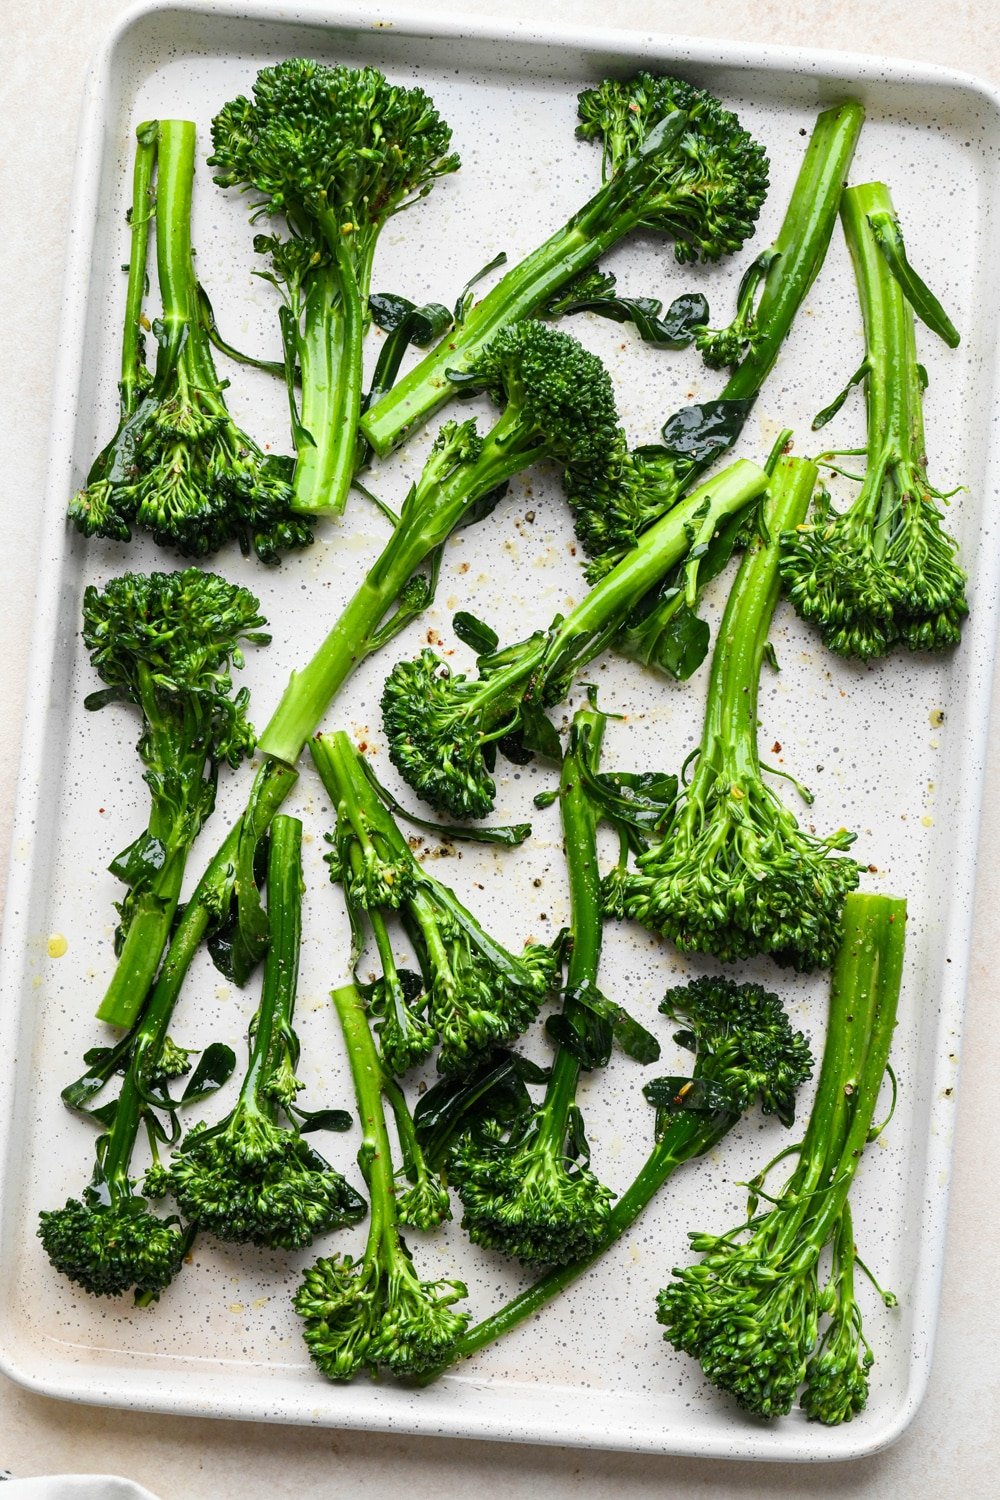 How to make roasted broccolini: Prepped stalks of broccolini on a sheet pan topped with olive oil and spices, before tossing to coat.